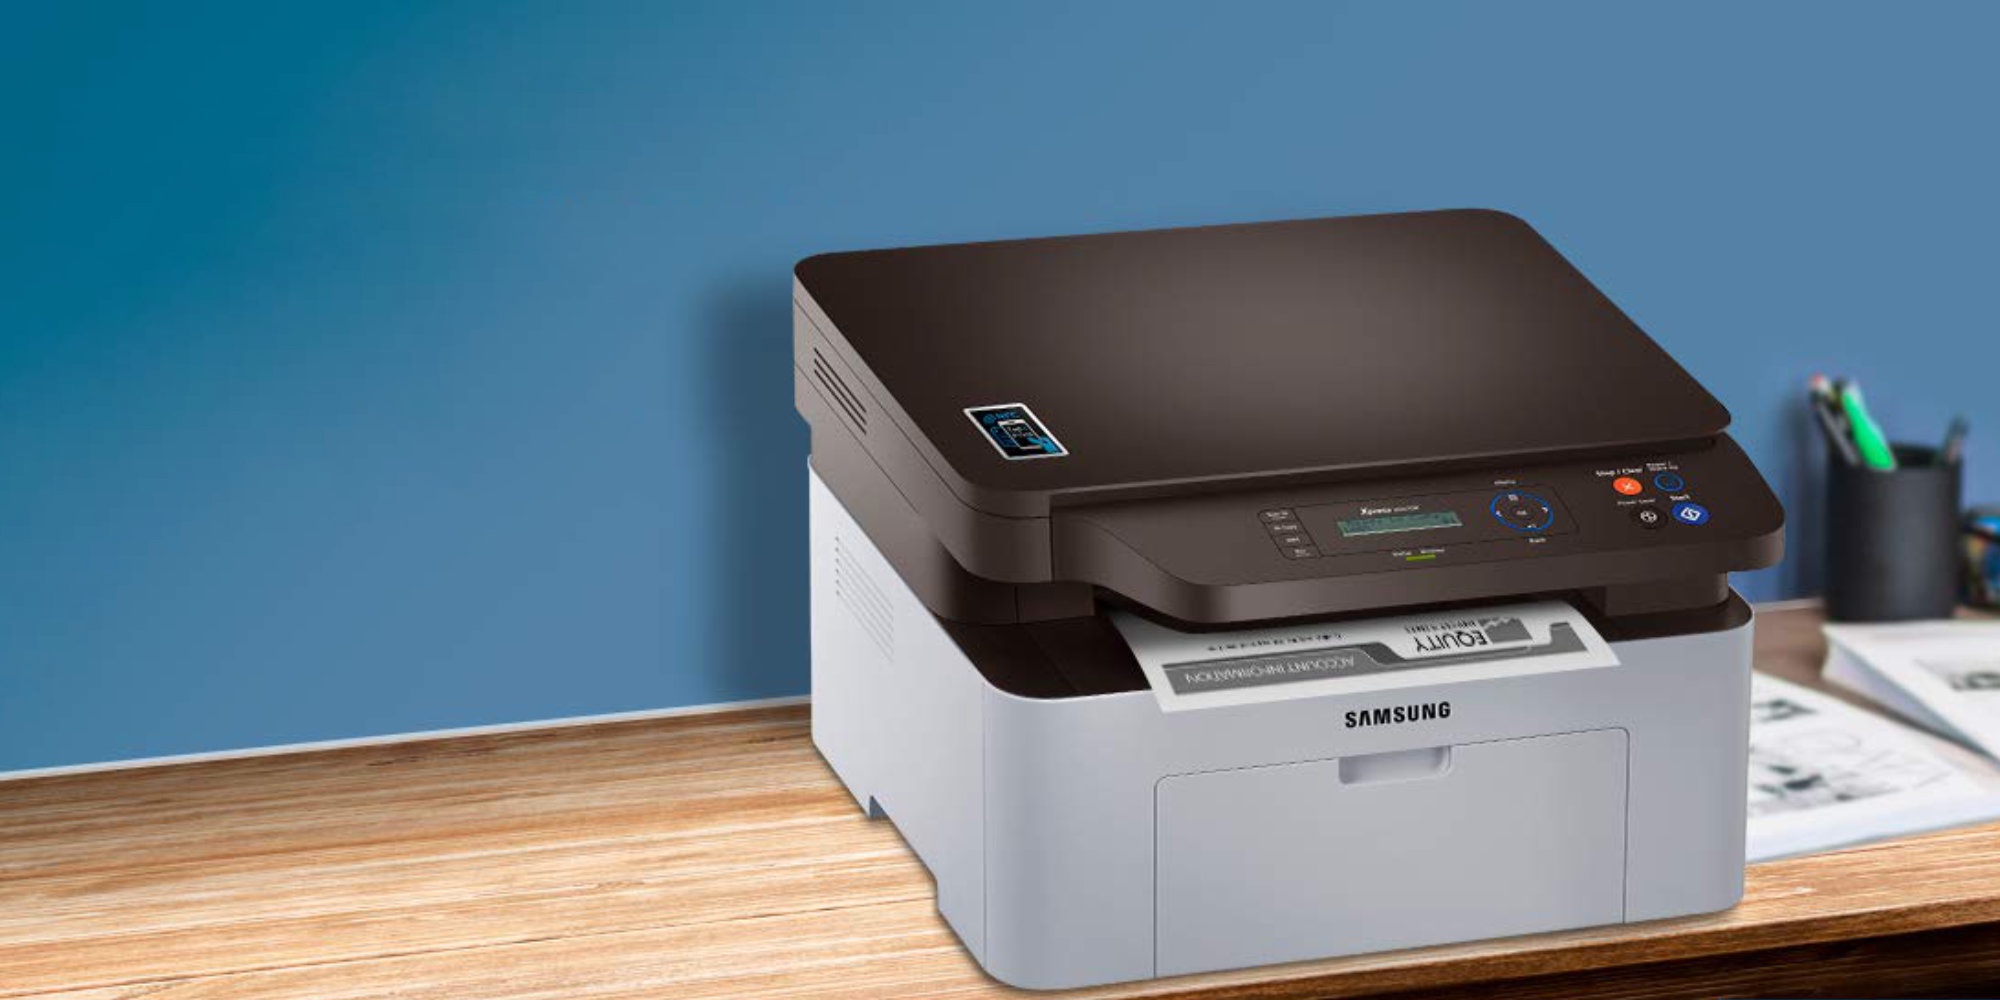 Add Samsung's B&W Laser AiO Printer to an office at a low of $50 (Reg. $130)